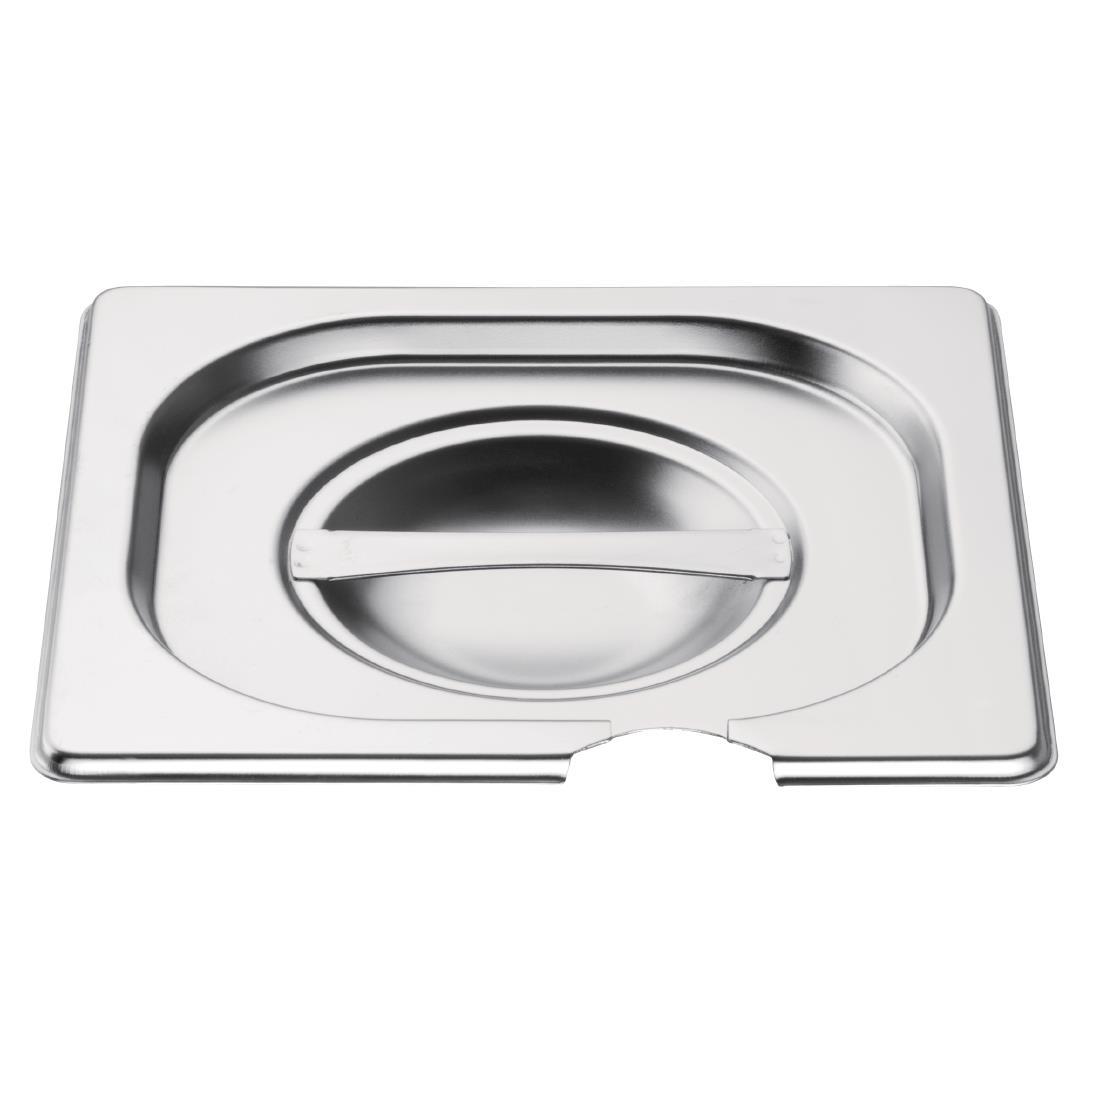 Vogue Stainless Steel 1/6 Gastronorm Notched Lid - CB175  - 2